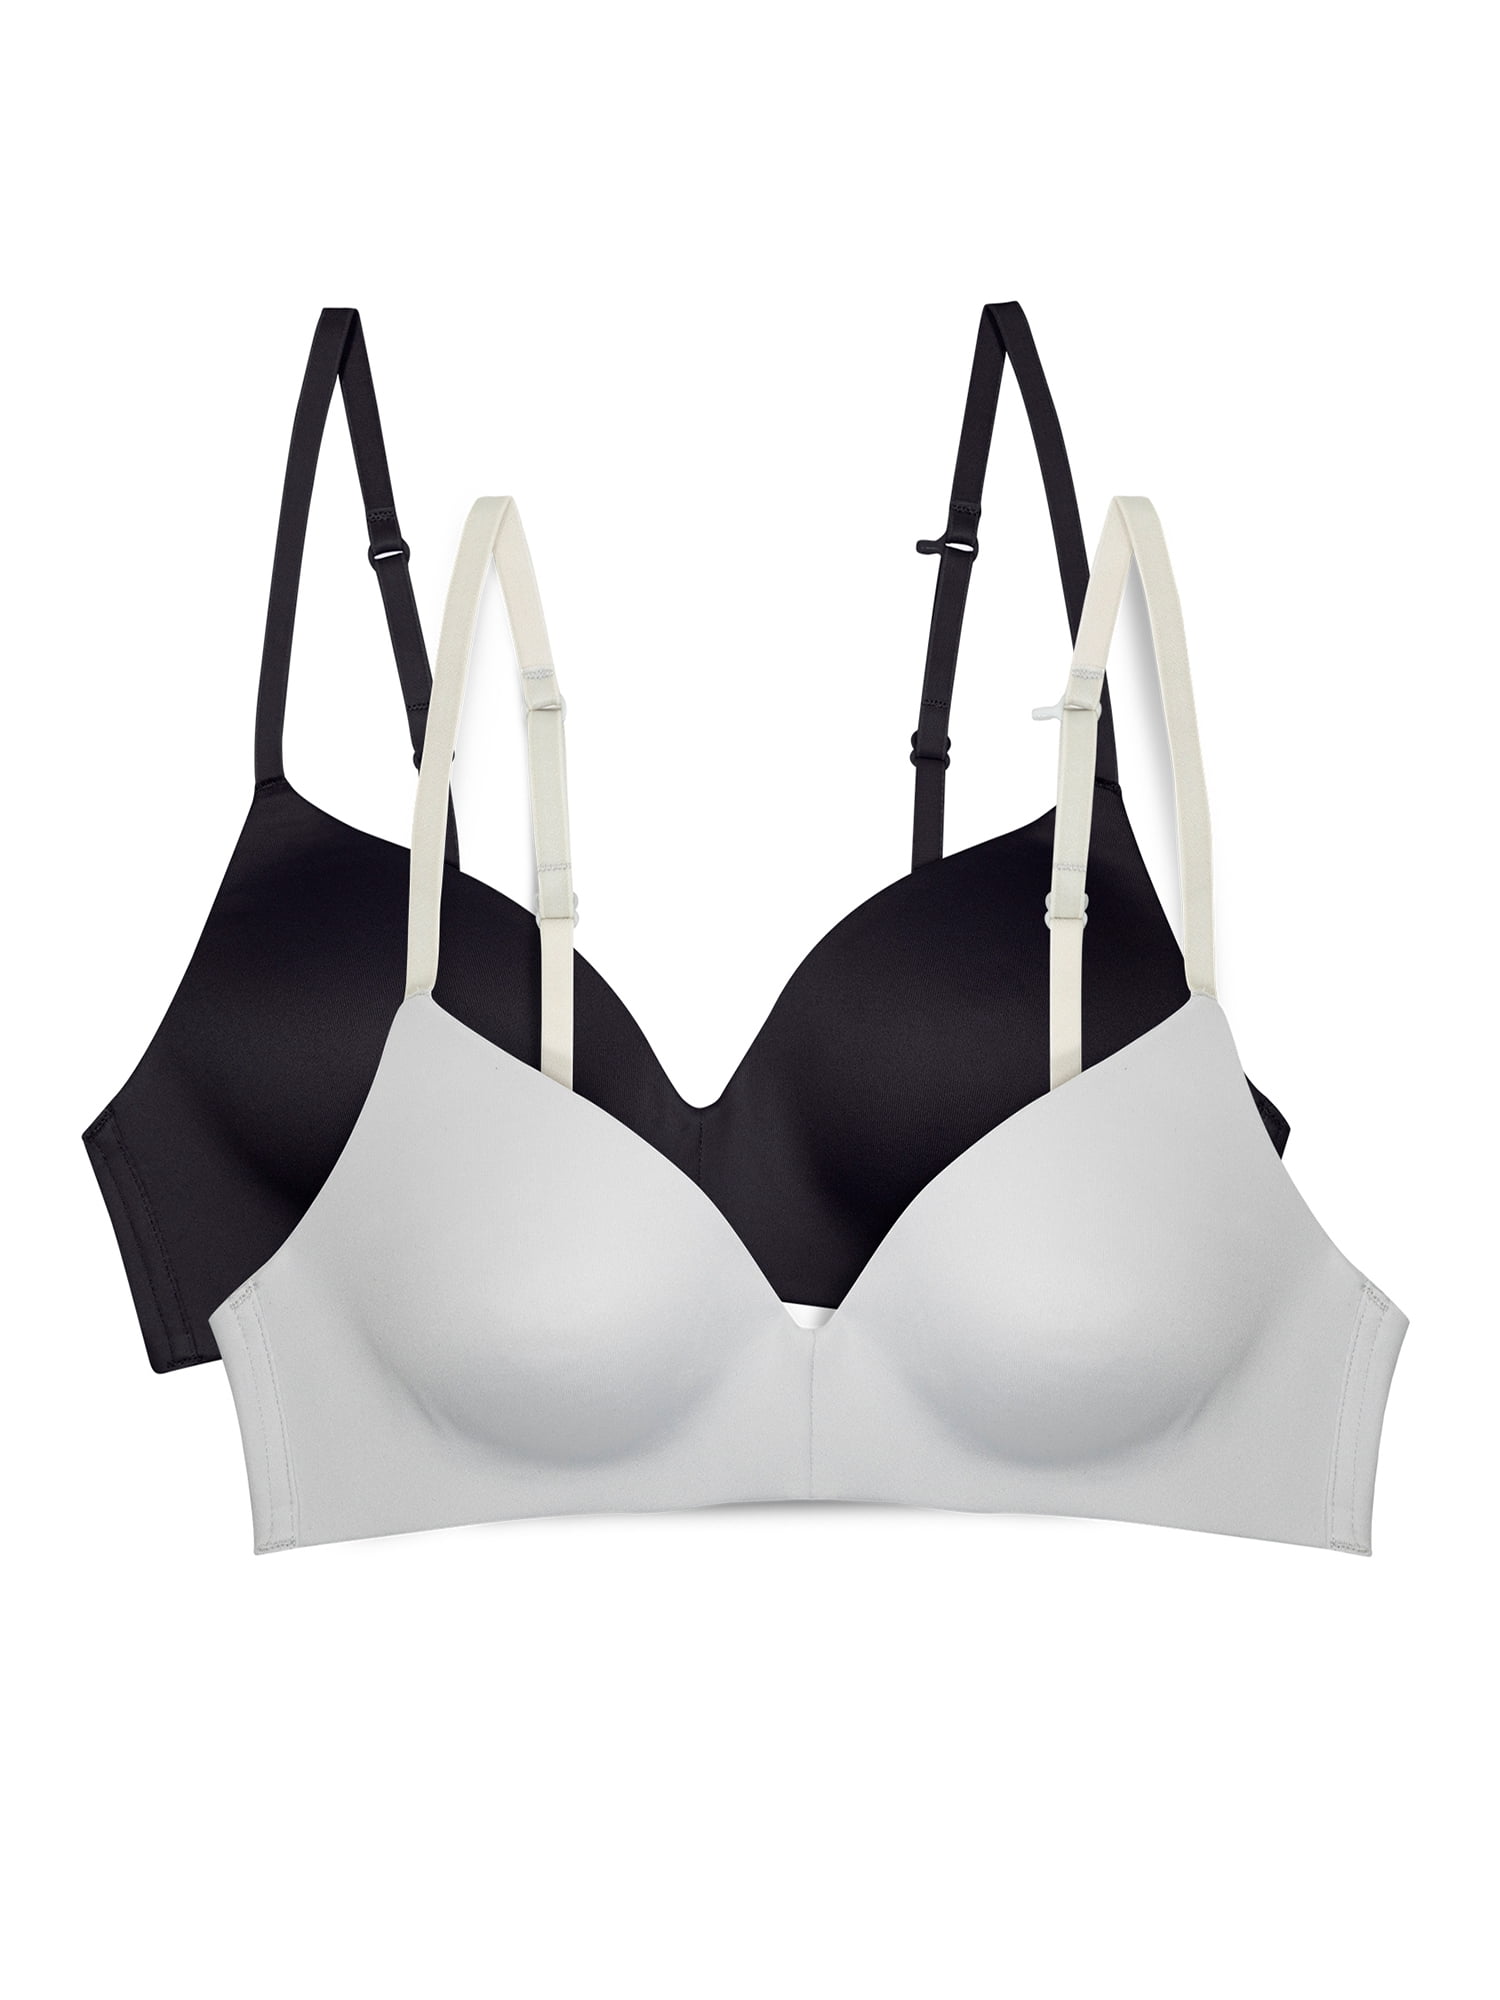 Naturana Charming Underwire Bra Size Eu 85 For 100 GB 38 Cup D Top White